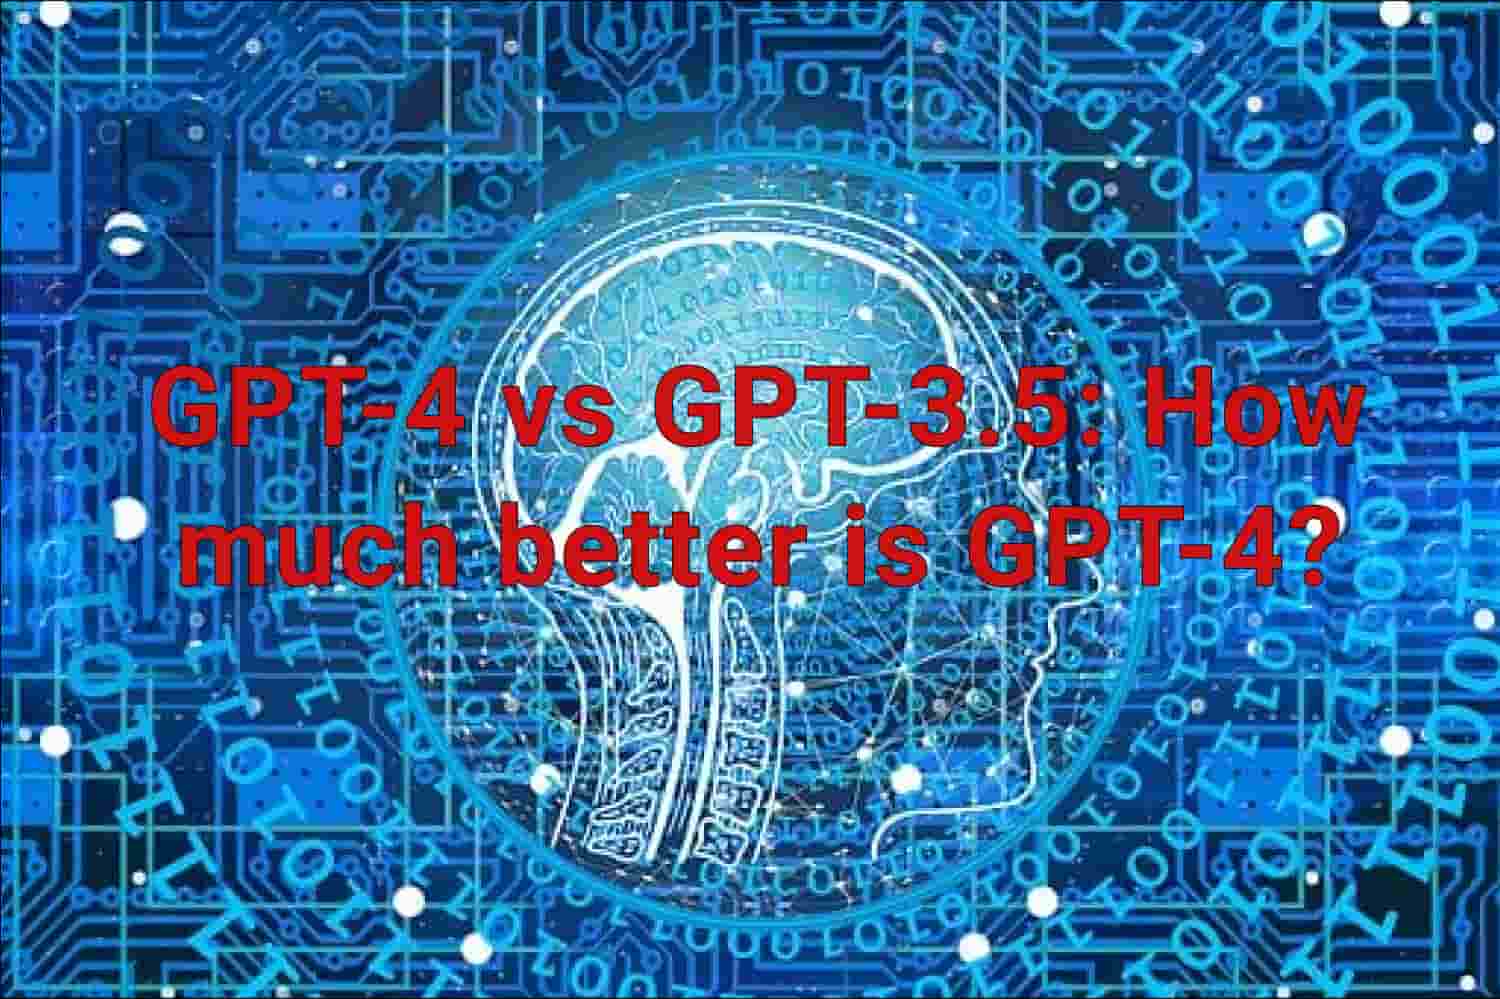 GPT-4 vs GPT-3: How much better is GPT-4?